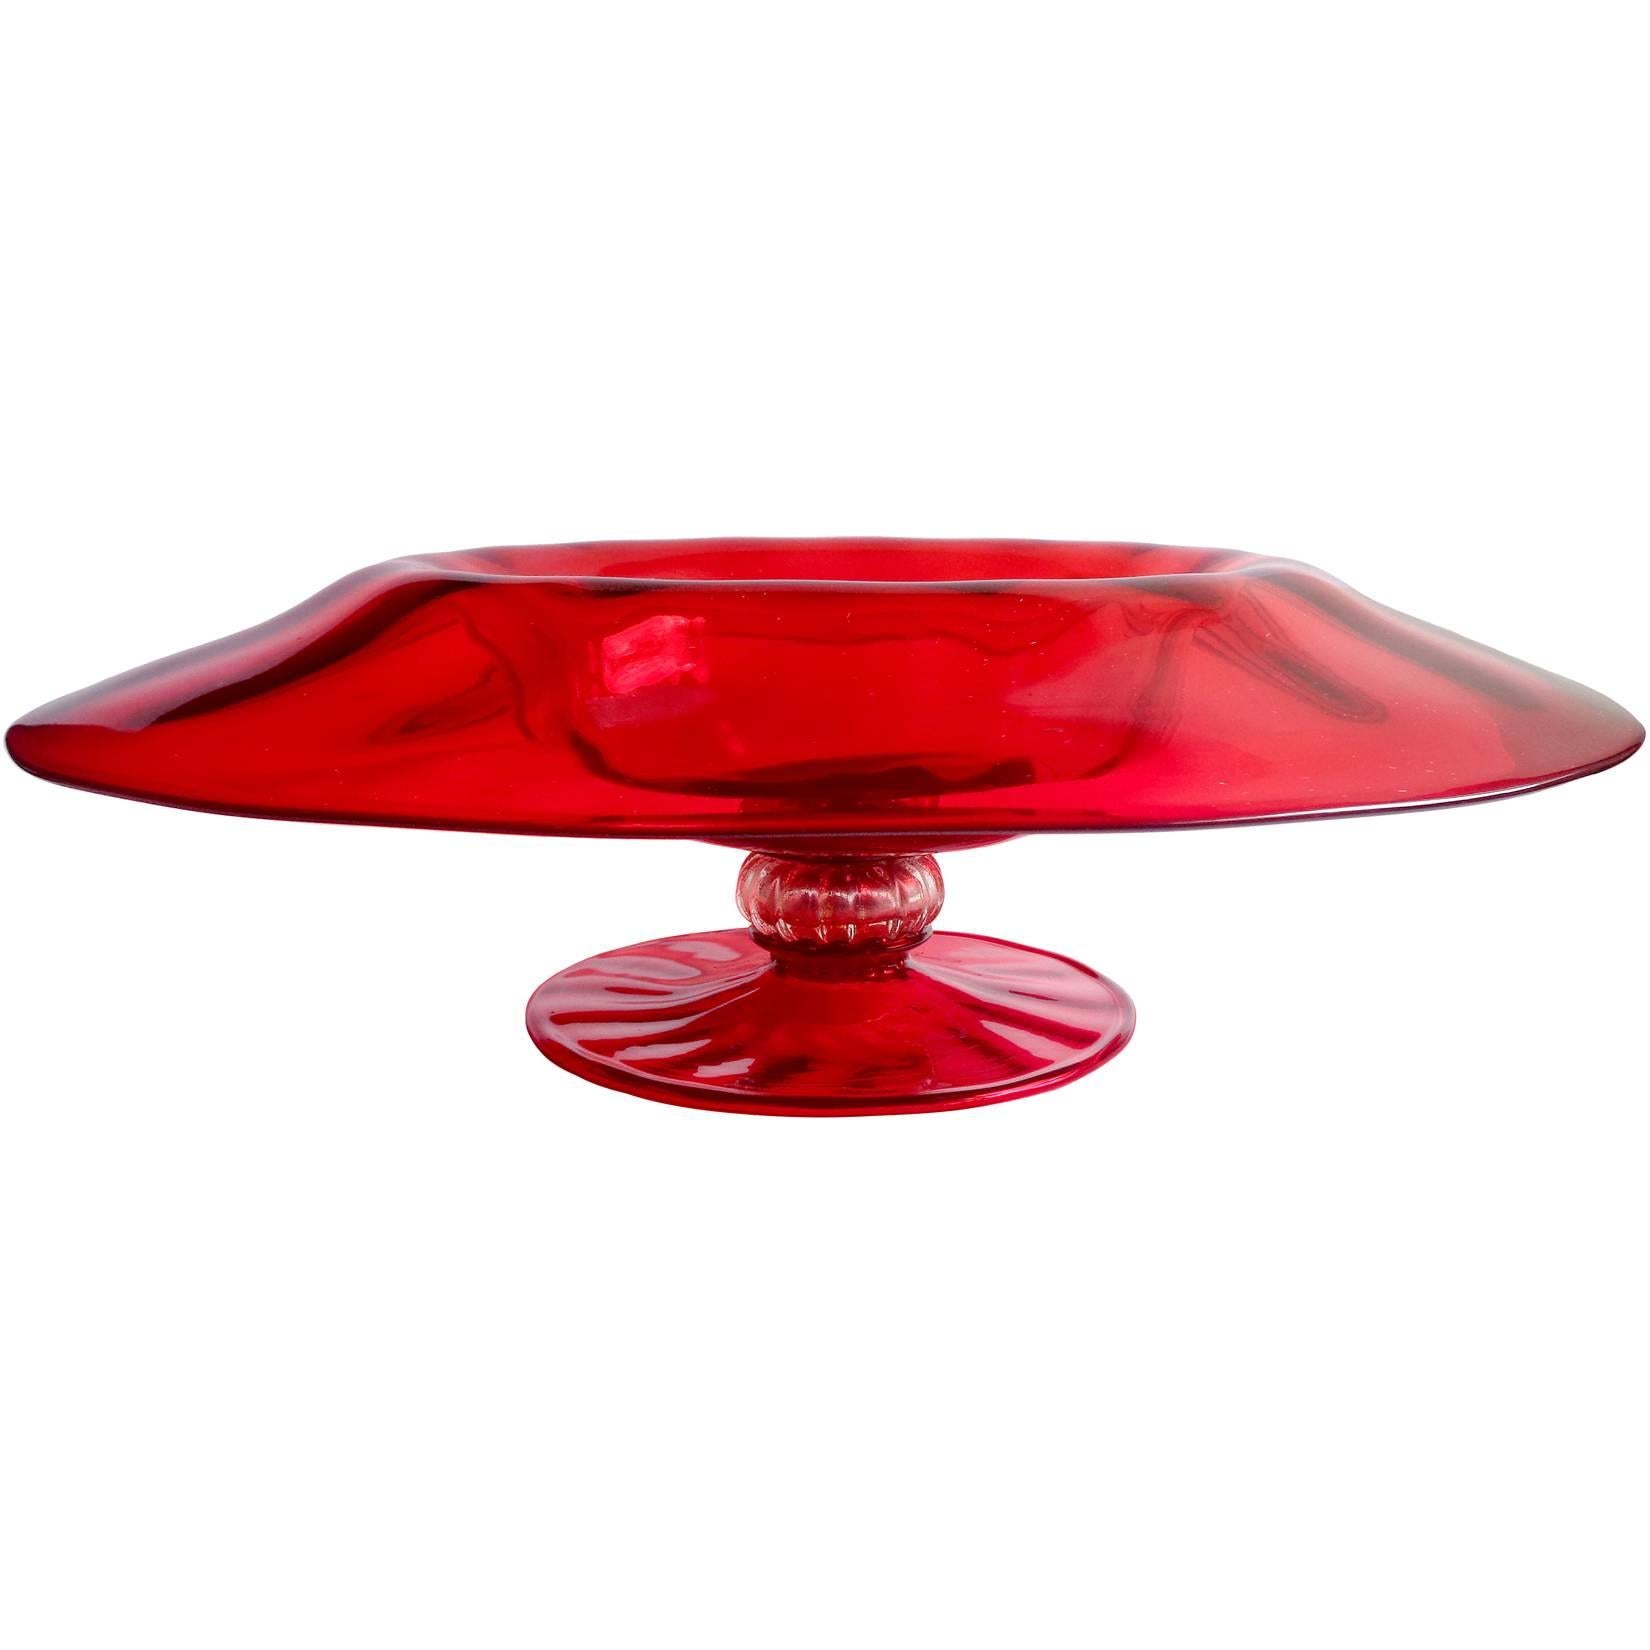 Murano Antique Ruby Red Gold Flecks Italian Art Glass Footed Centerpiece Bowl For Sale